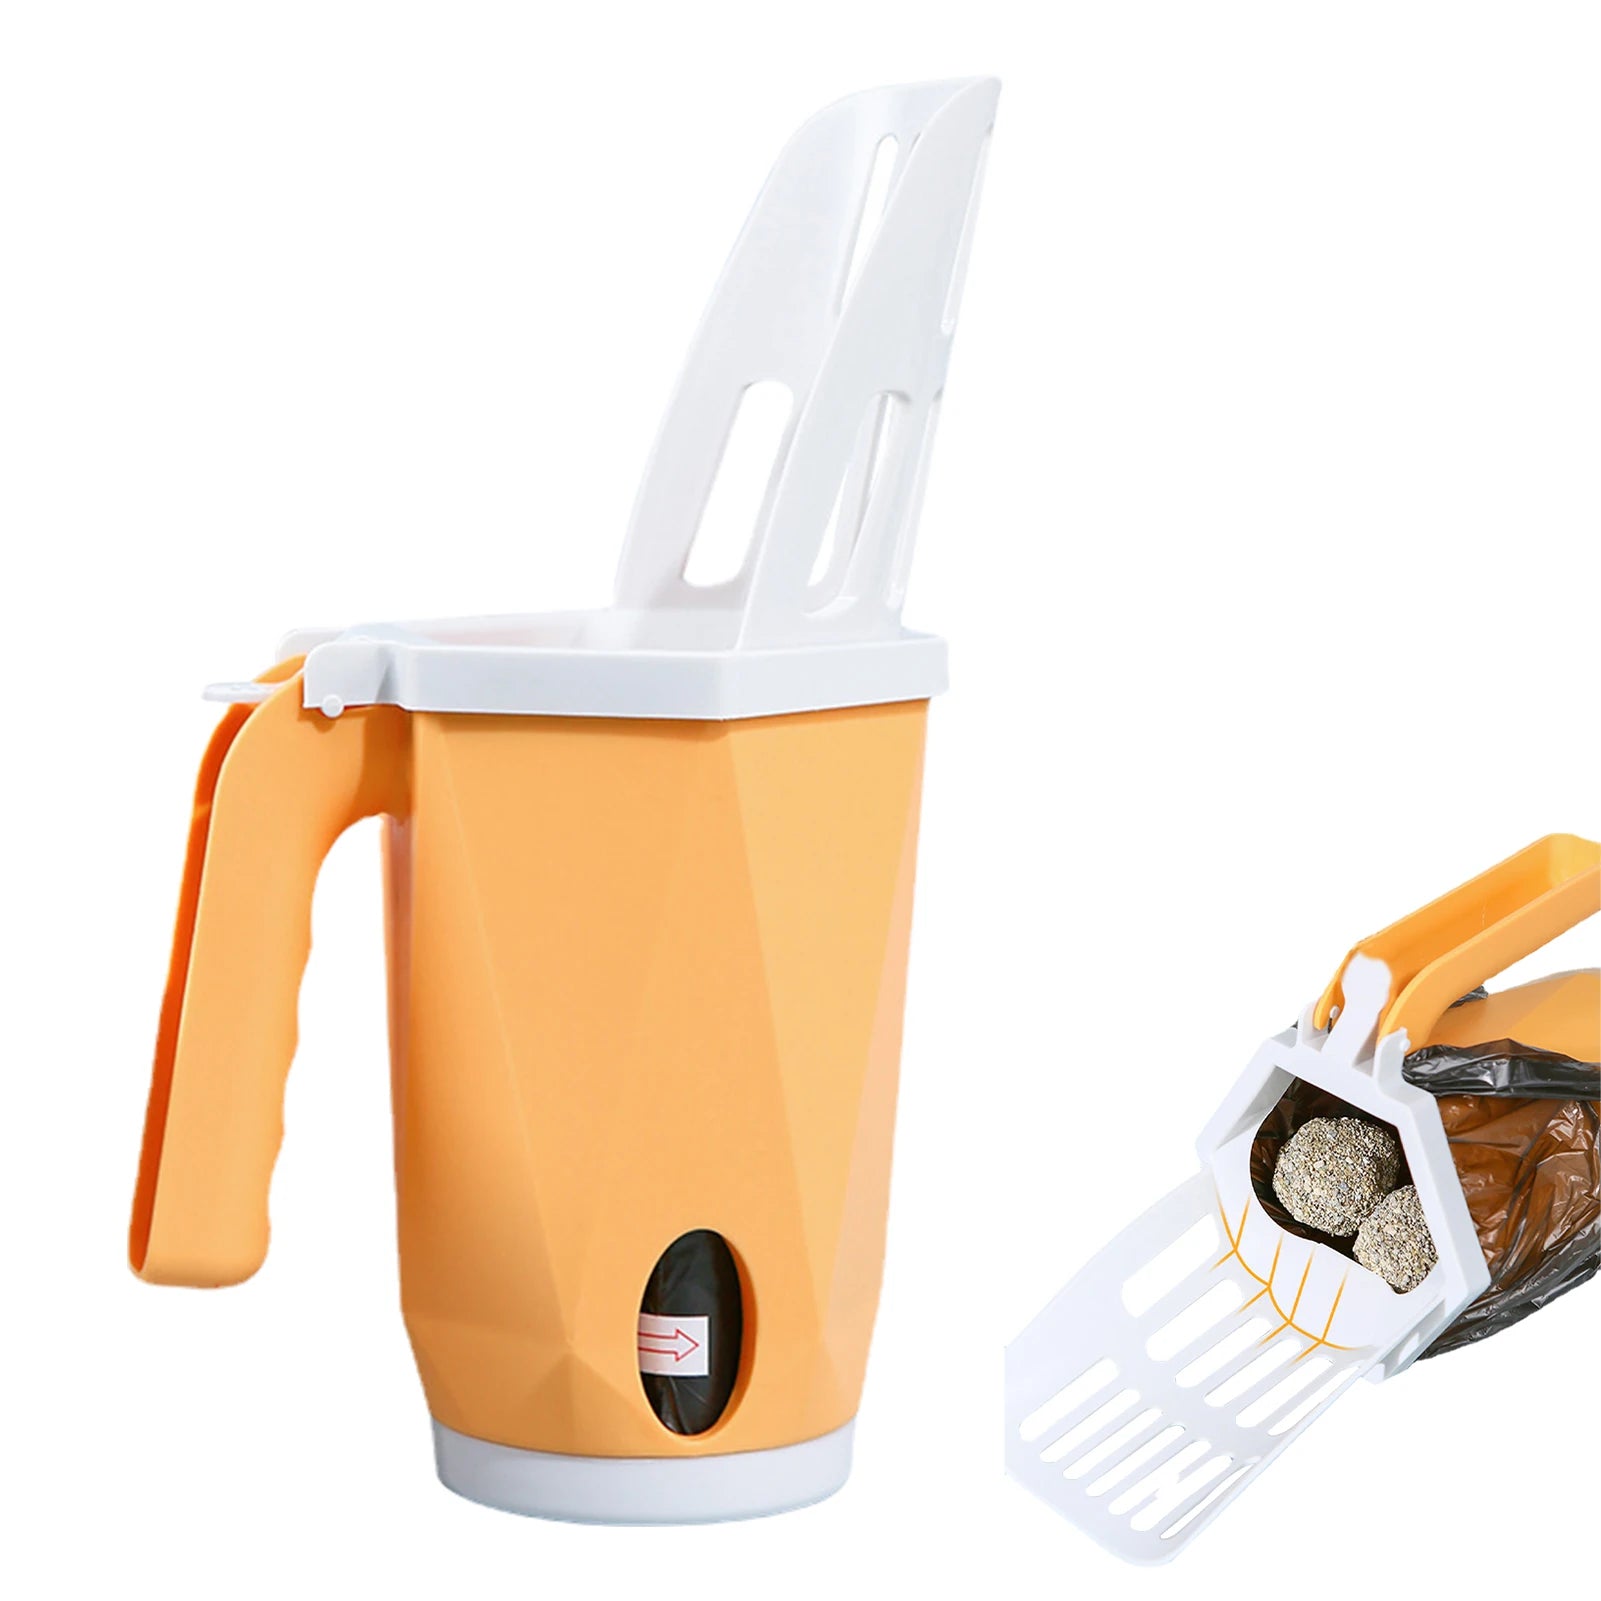 Cat Litter Shovel Integrated Detachable Deep Cat Litter Shovel Easy to Use Cat Litter Sifter Scoop System with Bags